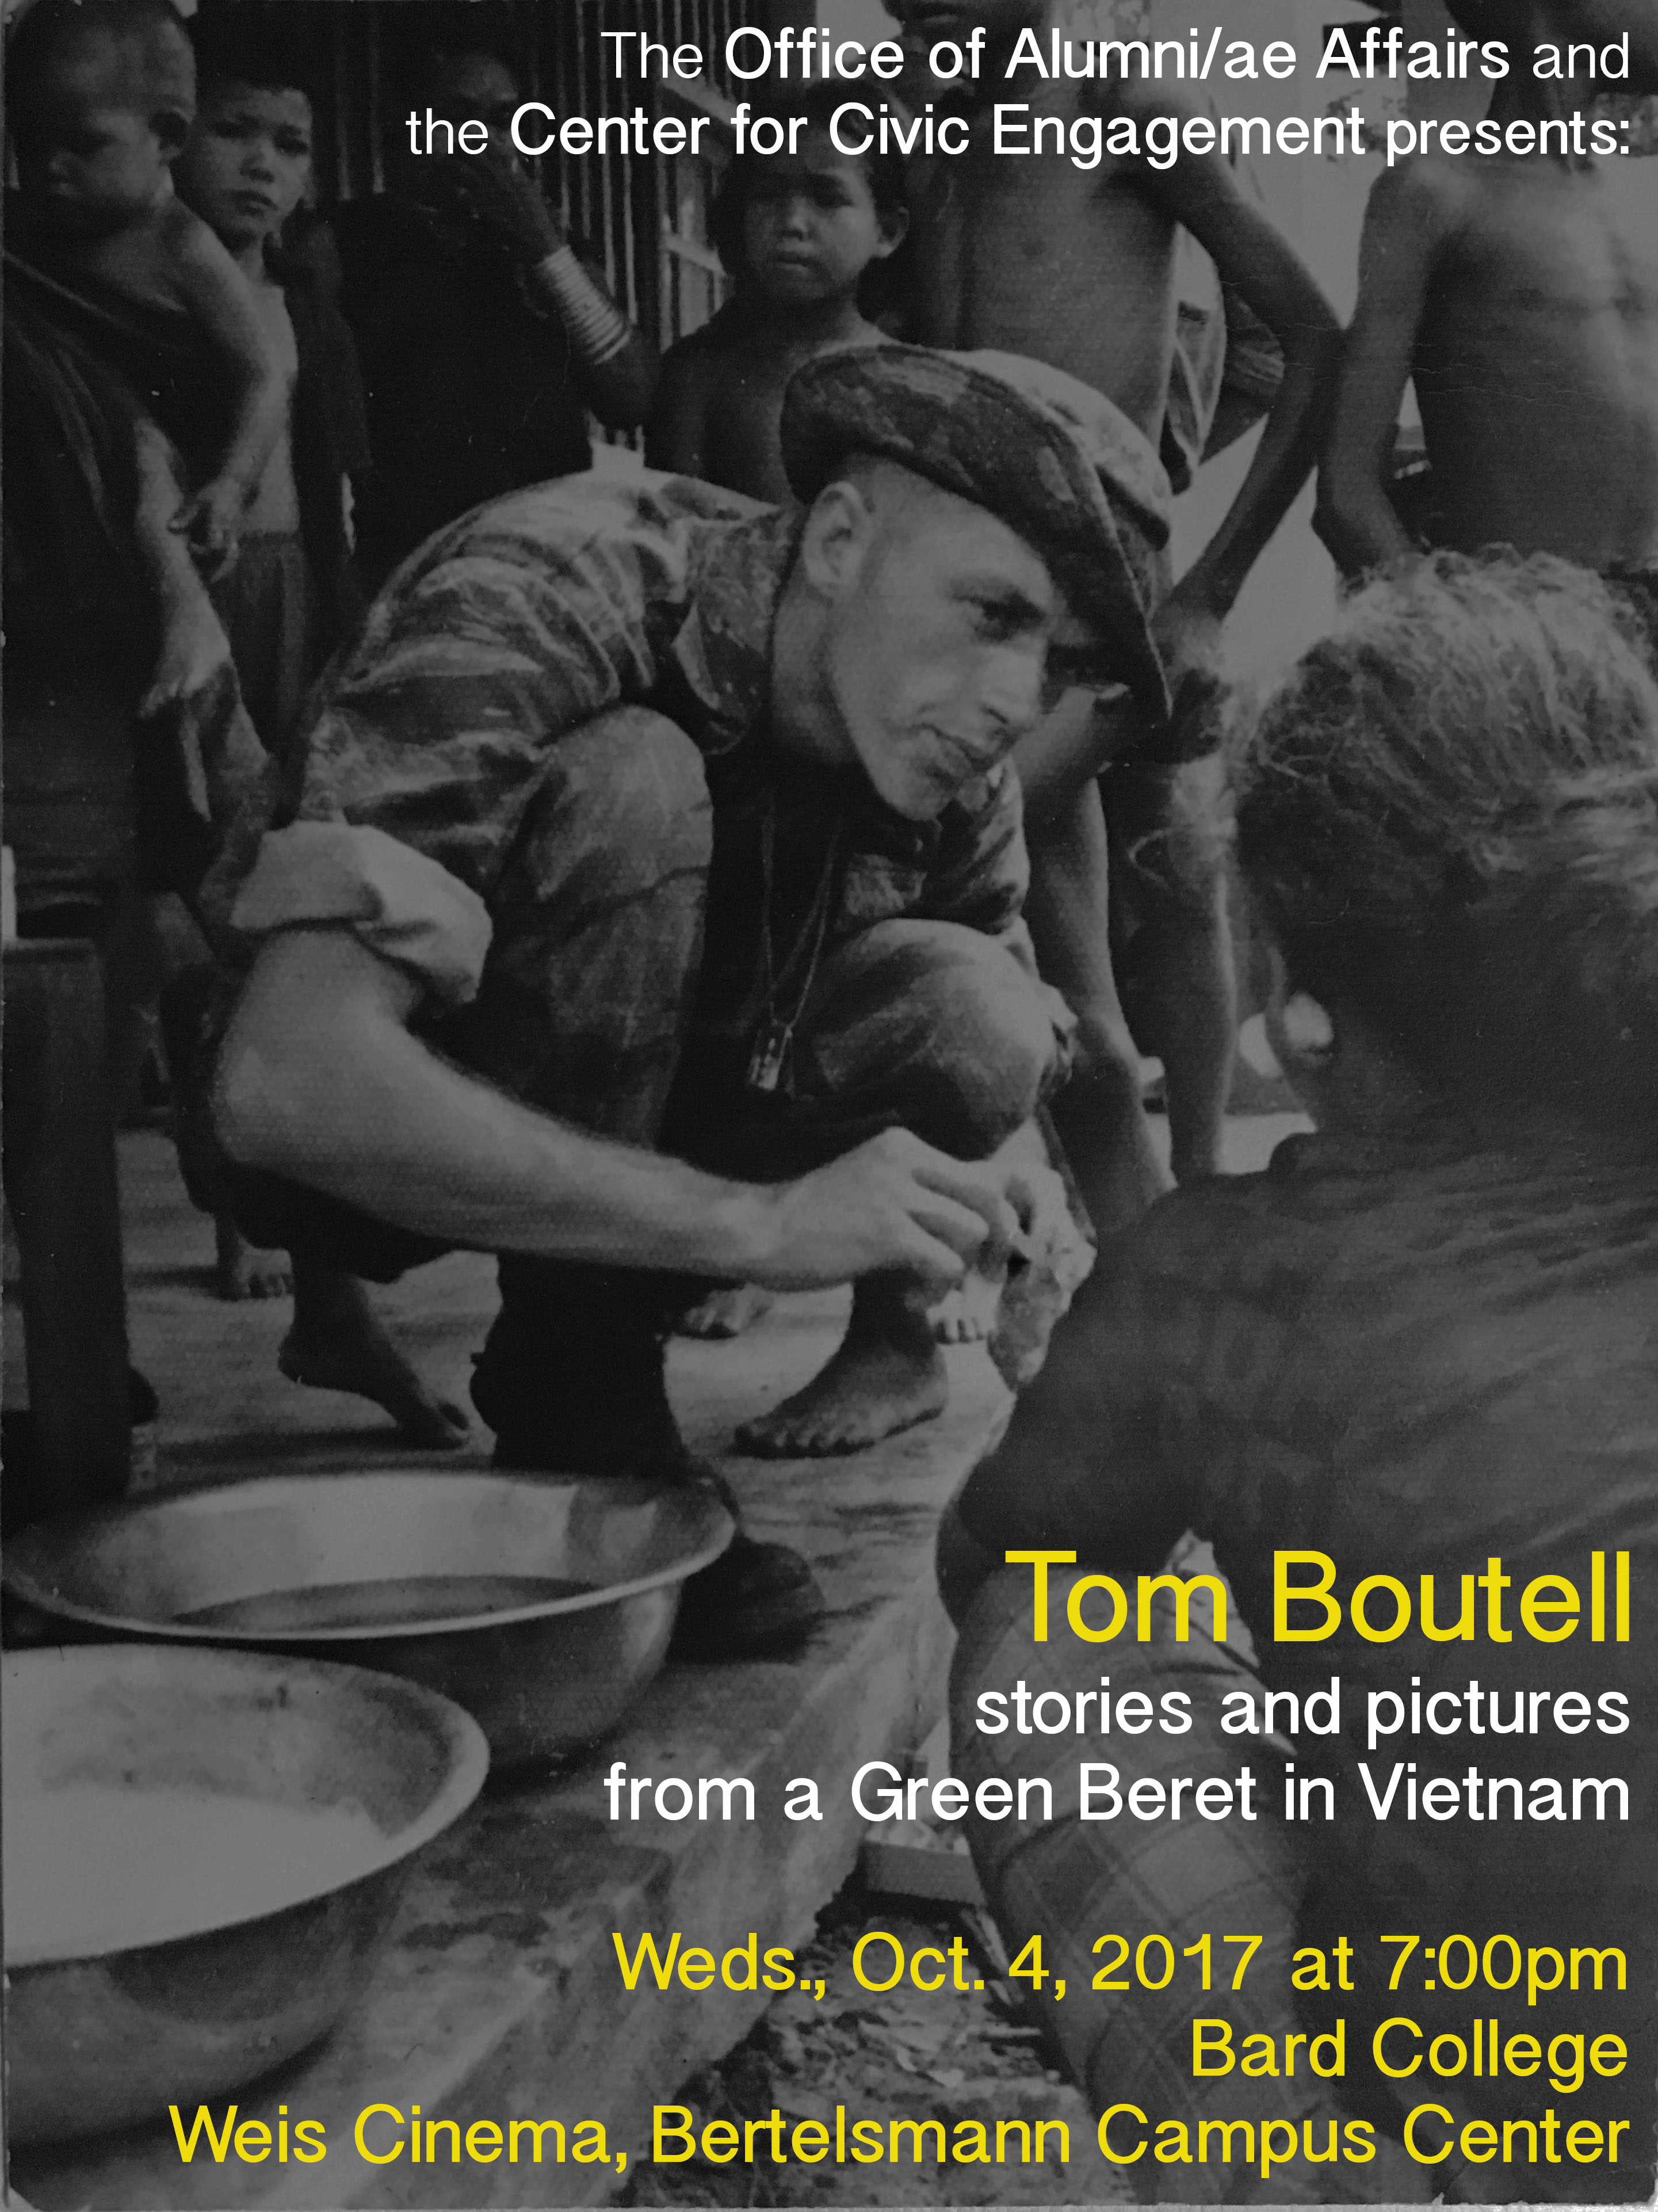 Tom Boutell Stories and Pictures from a Green Beret in Vietnam